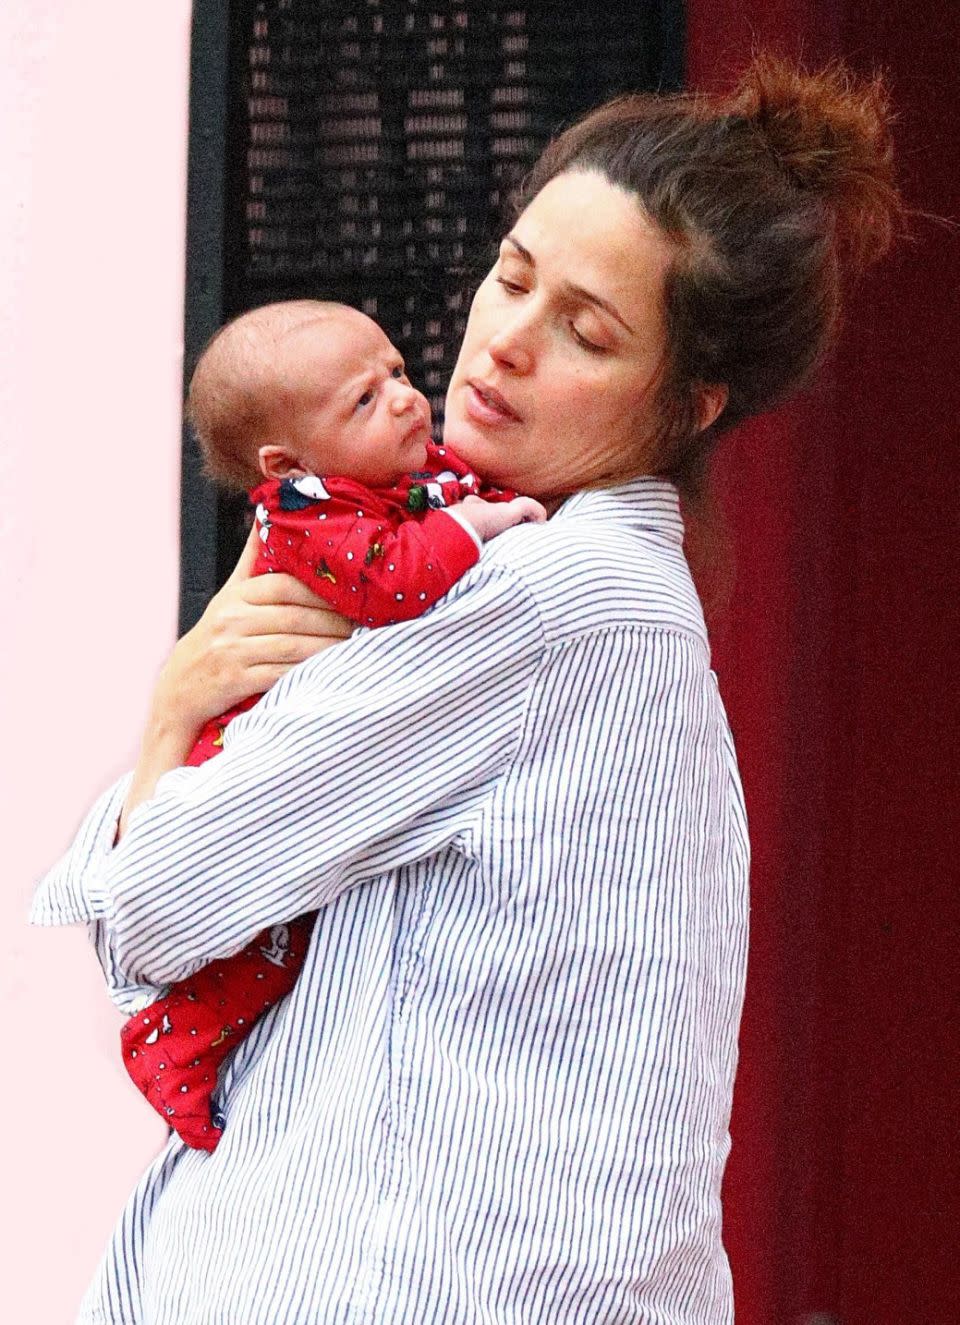 Rose Byrne has been pictured with her newborn baby for the first time while out in New York City. Source: Backgrid